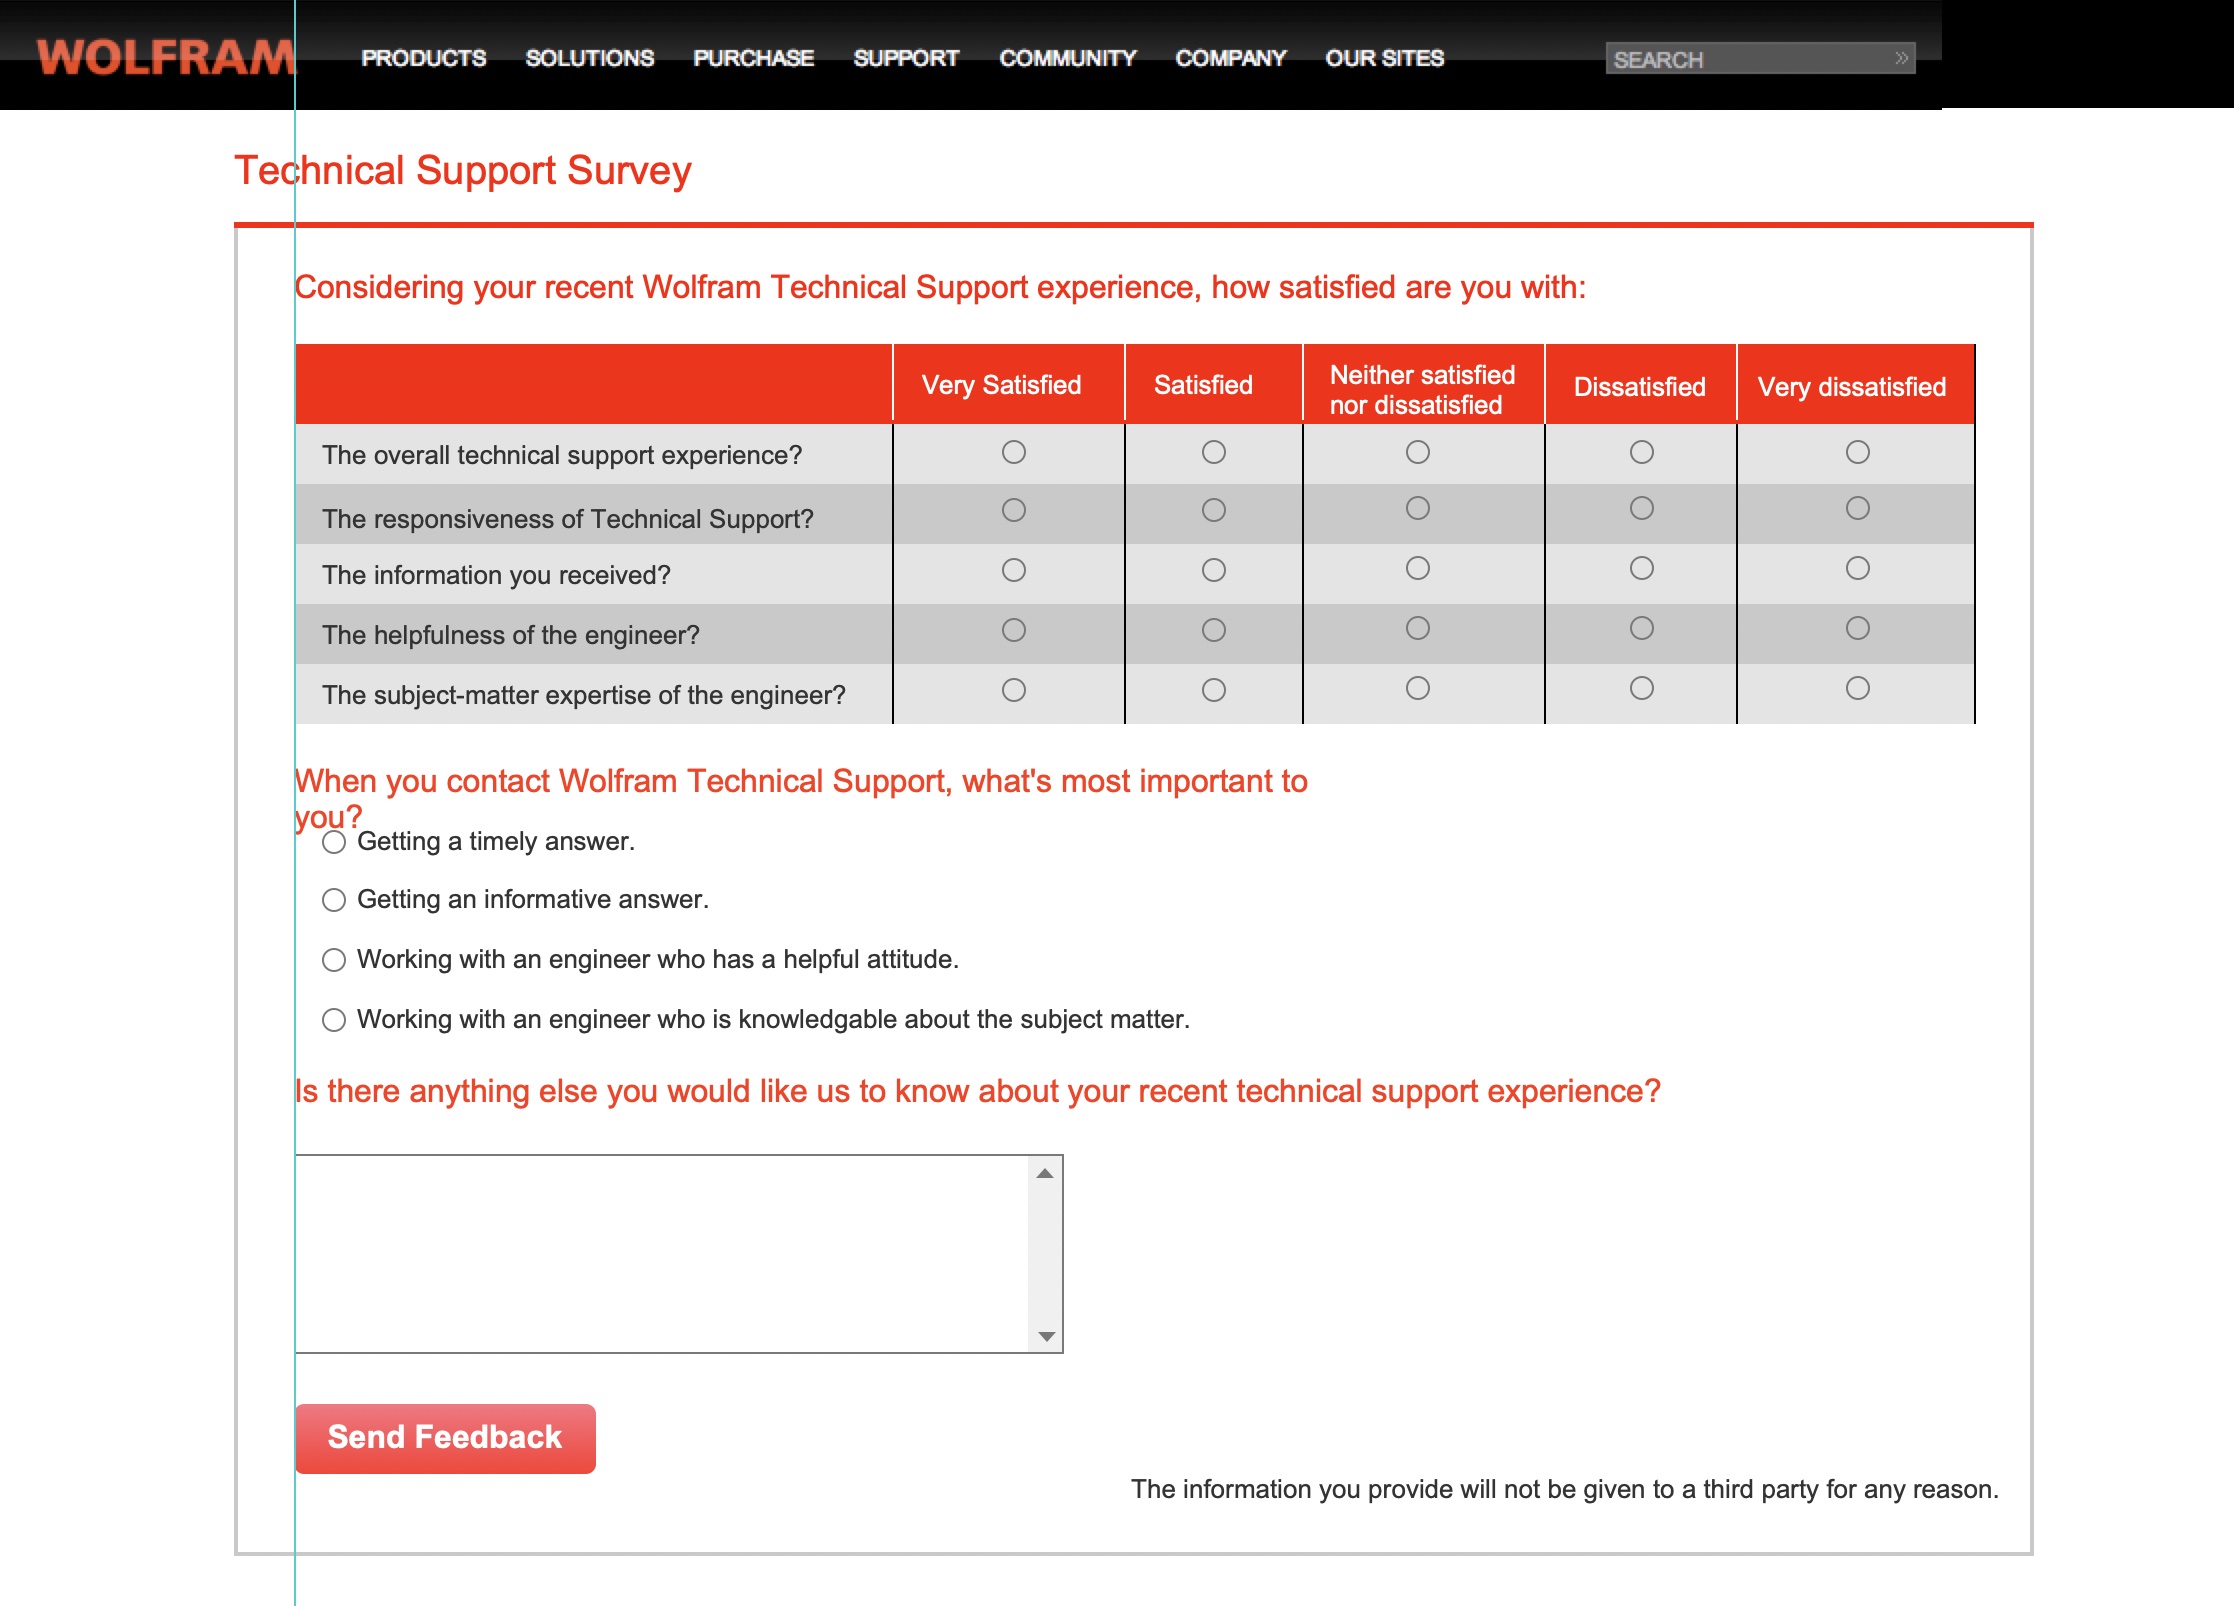 Wolfram Research Technical Support Survey System, eleventh work sample